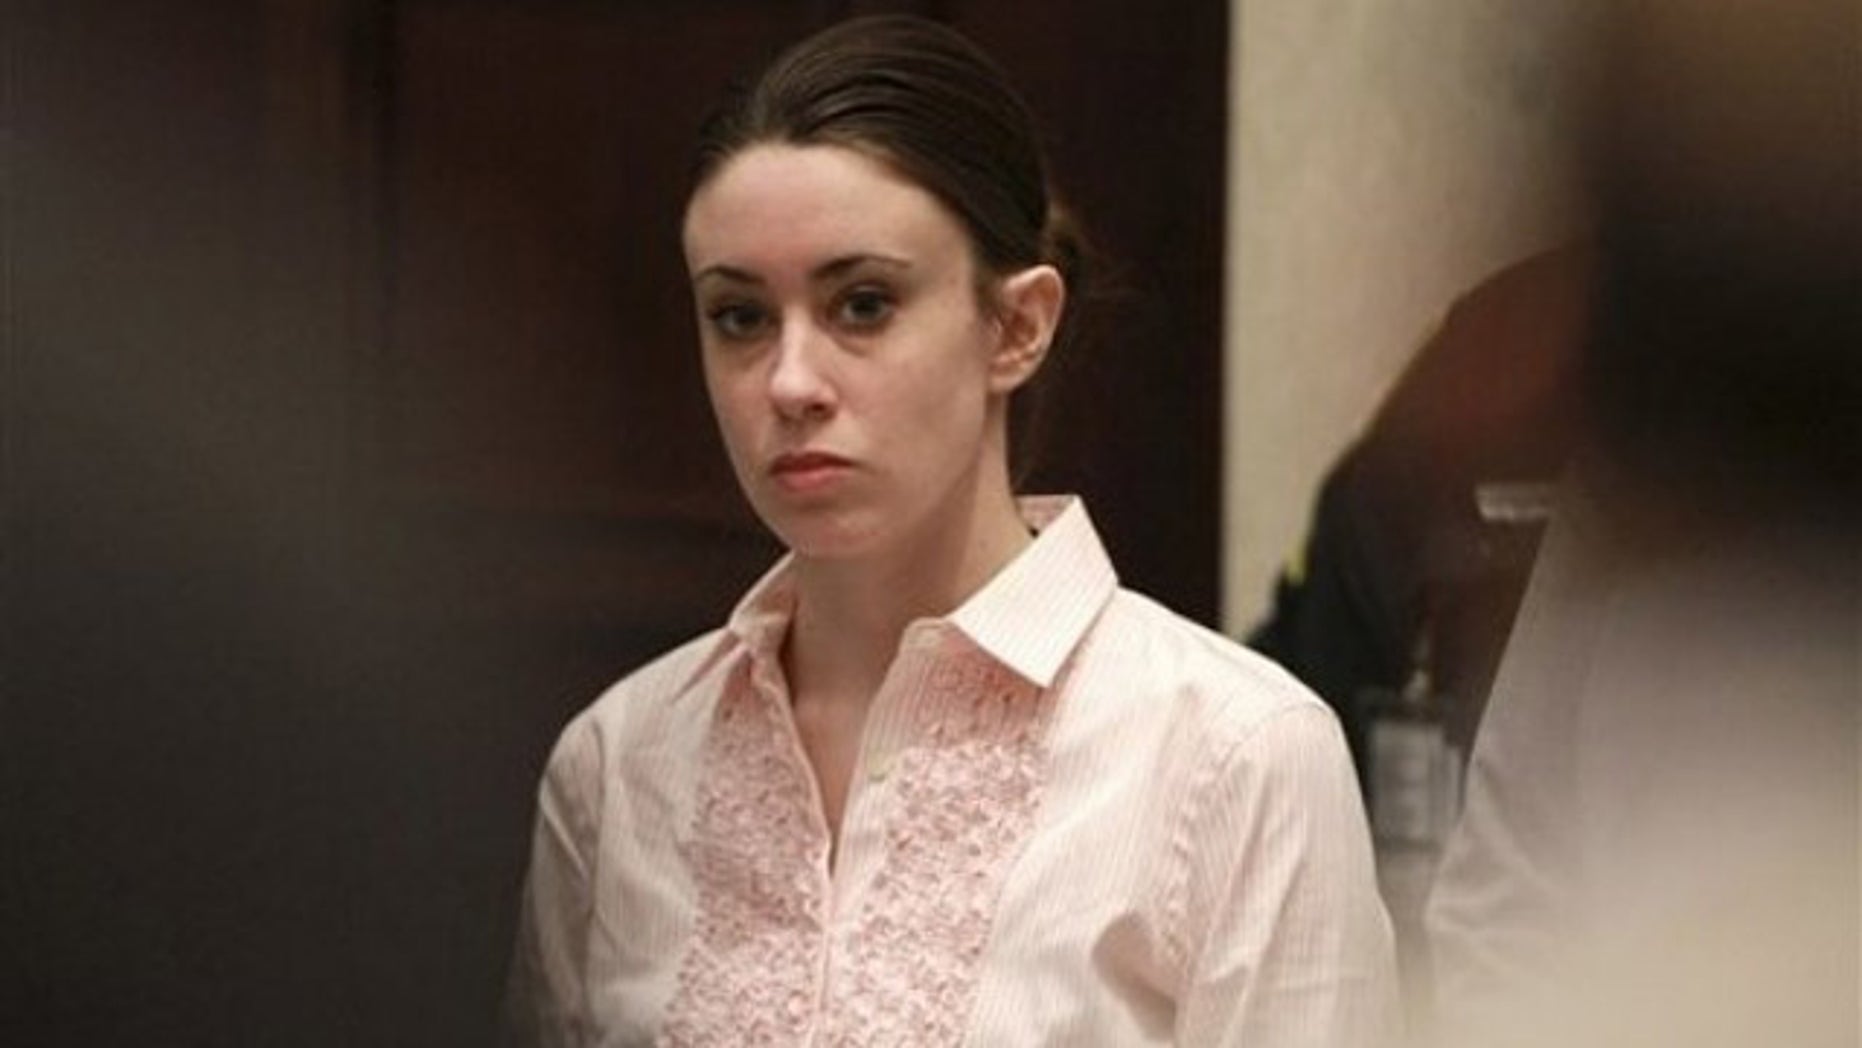 Judge Orders Casey Anthony to Pay $100G in Fees for Investigation Fox